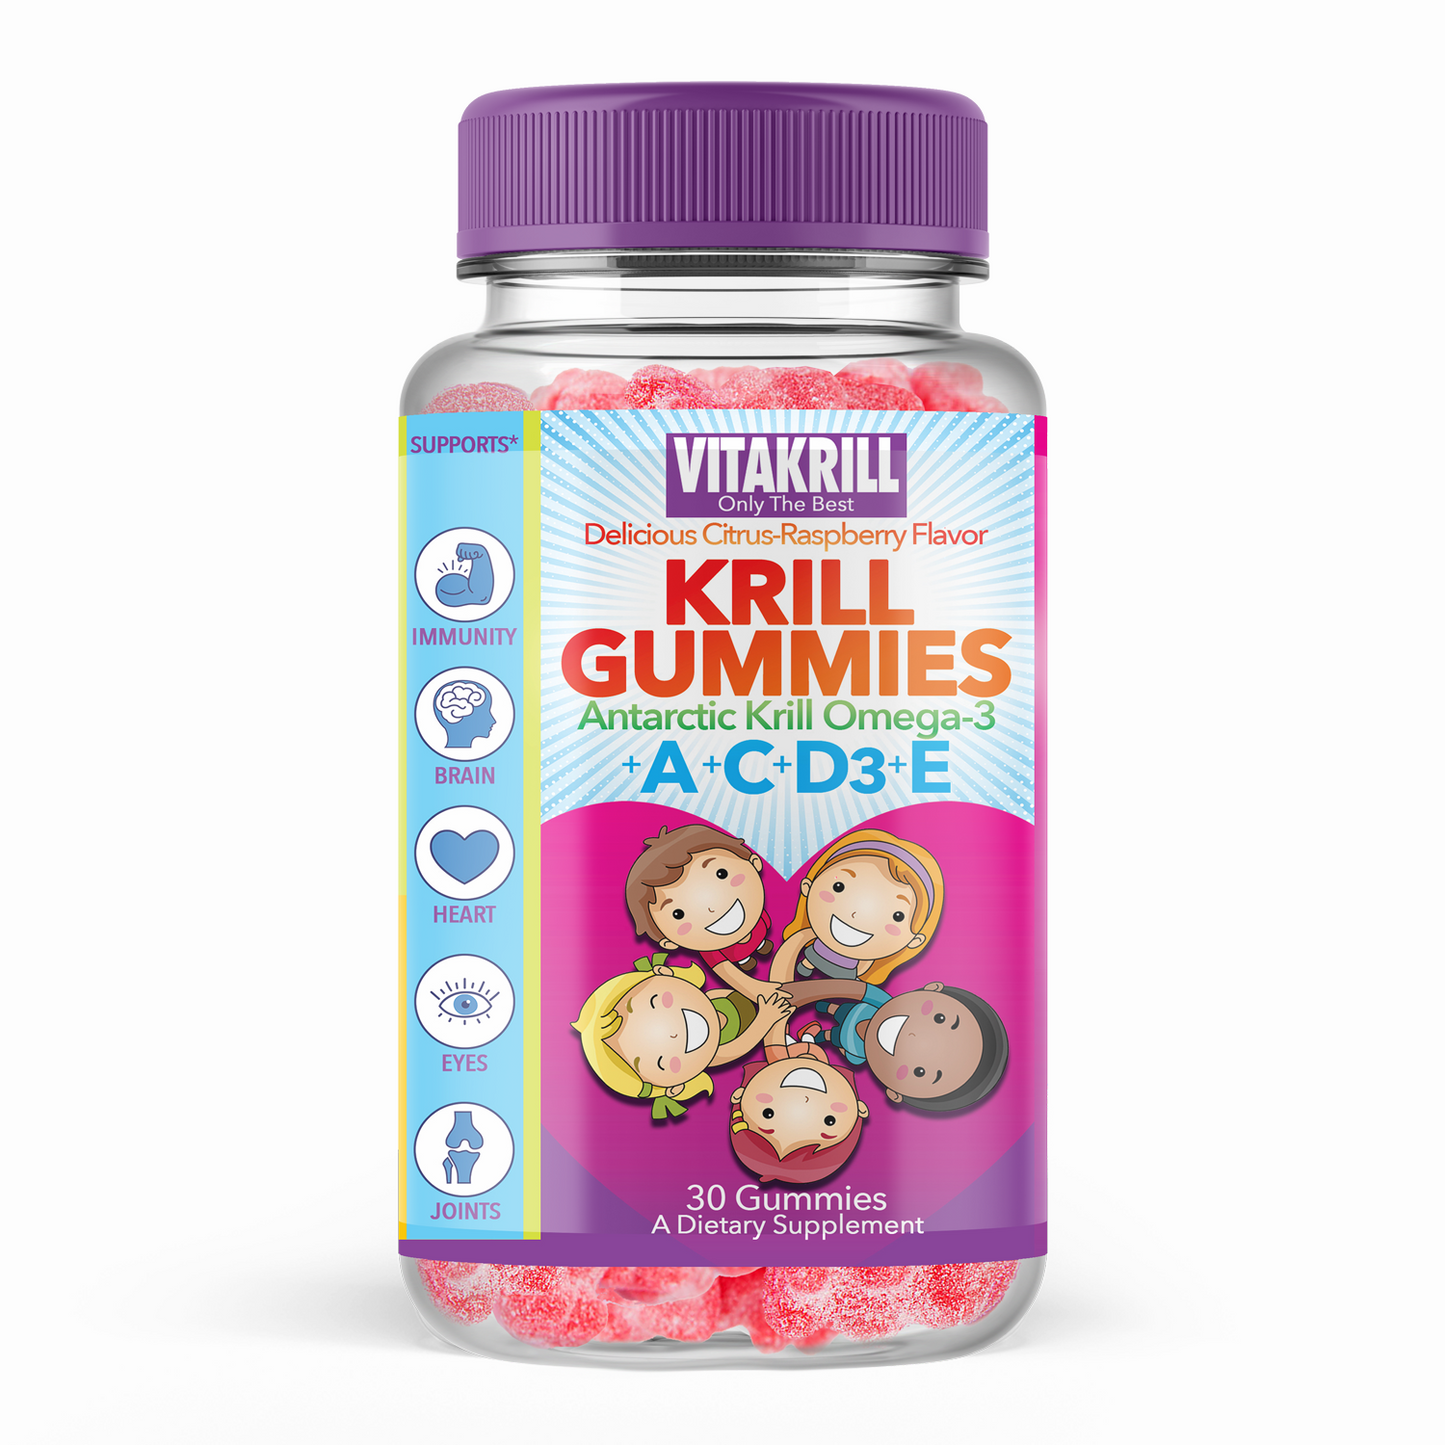 Delicious Citrus-Raspberry Krill Gummies - 30 gummybears for kids and adults